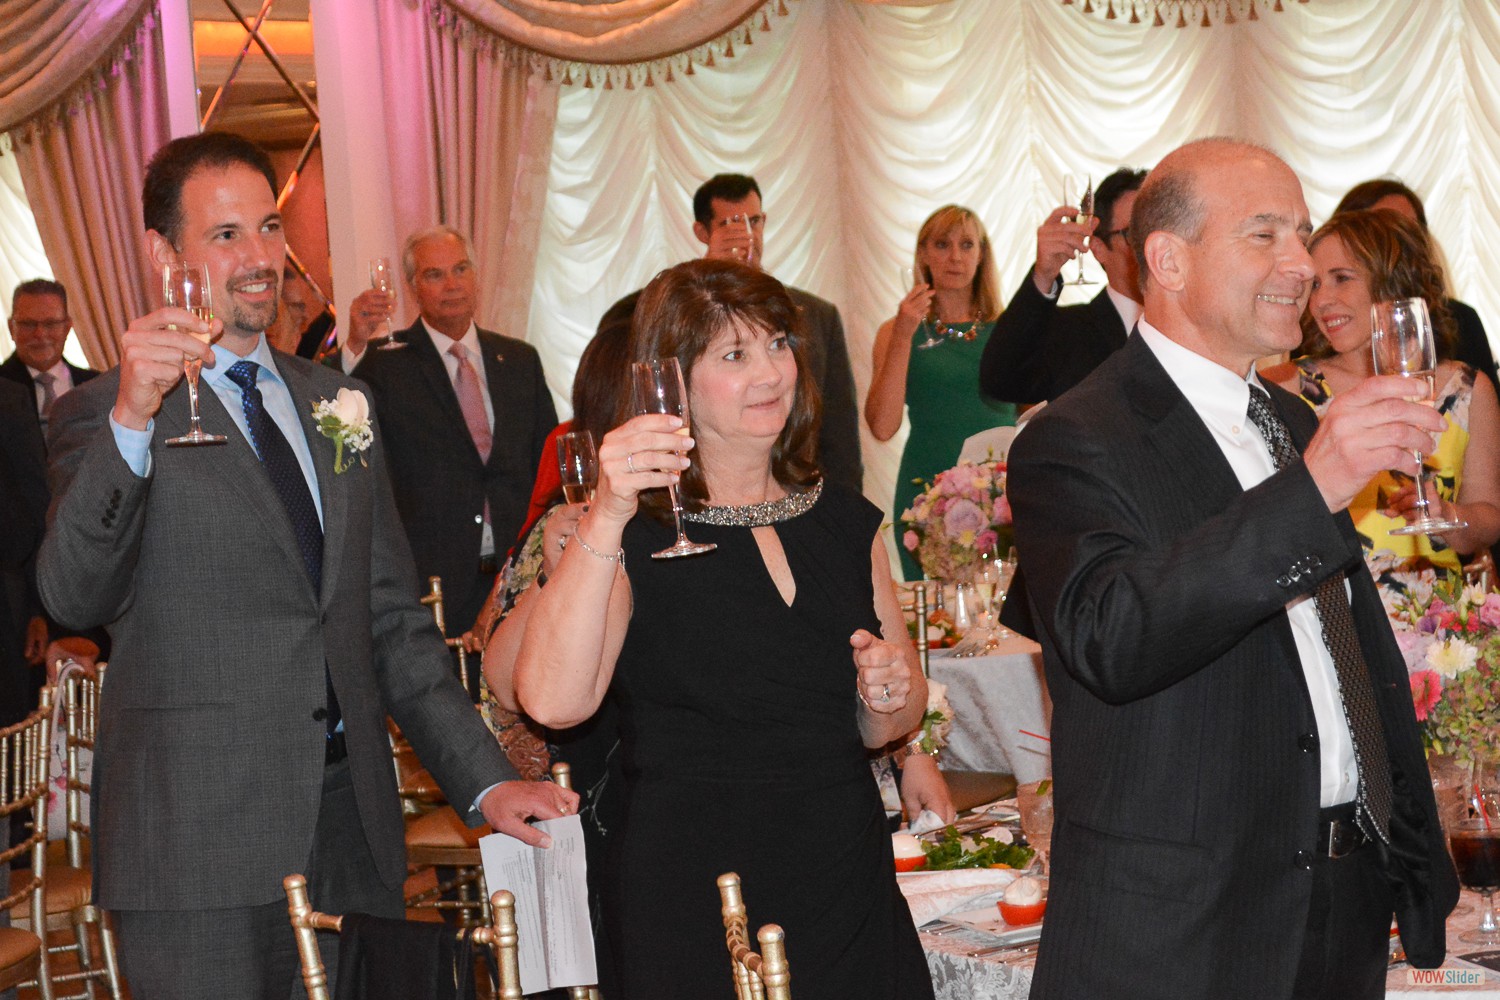 Members offer a toast to the incoming Chapter Officers